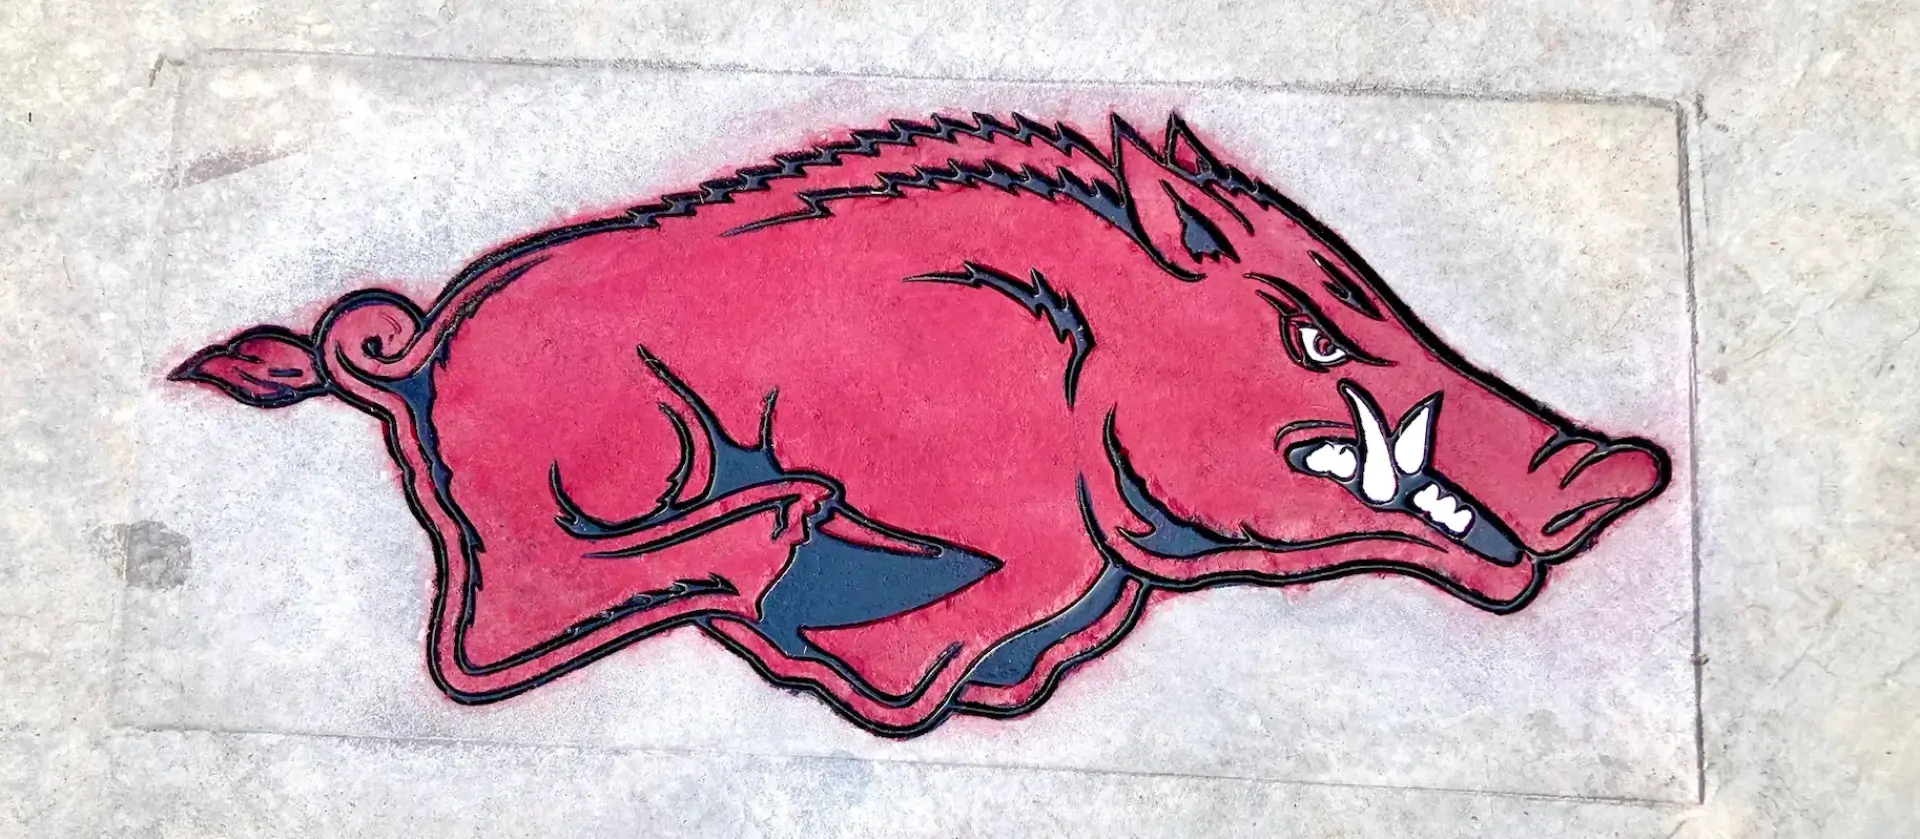 A pink hog is painted on the ground.